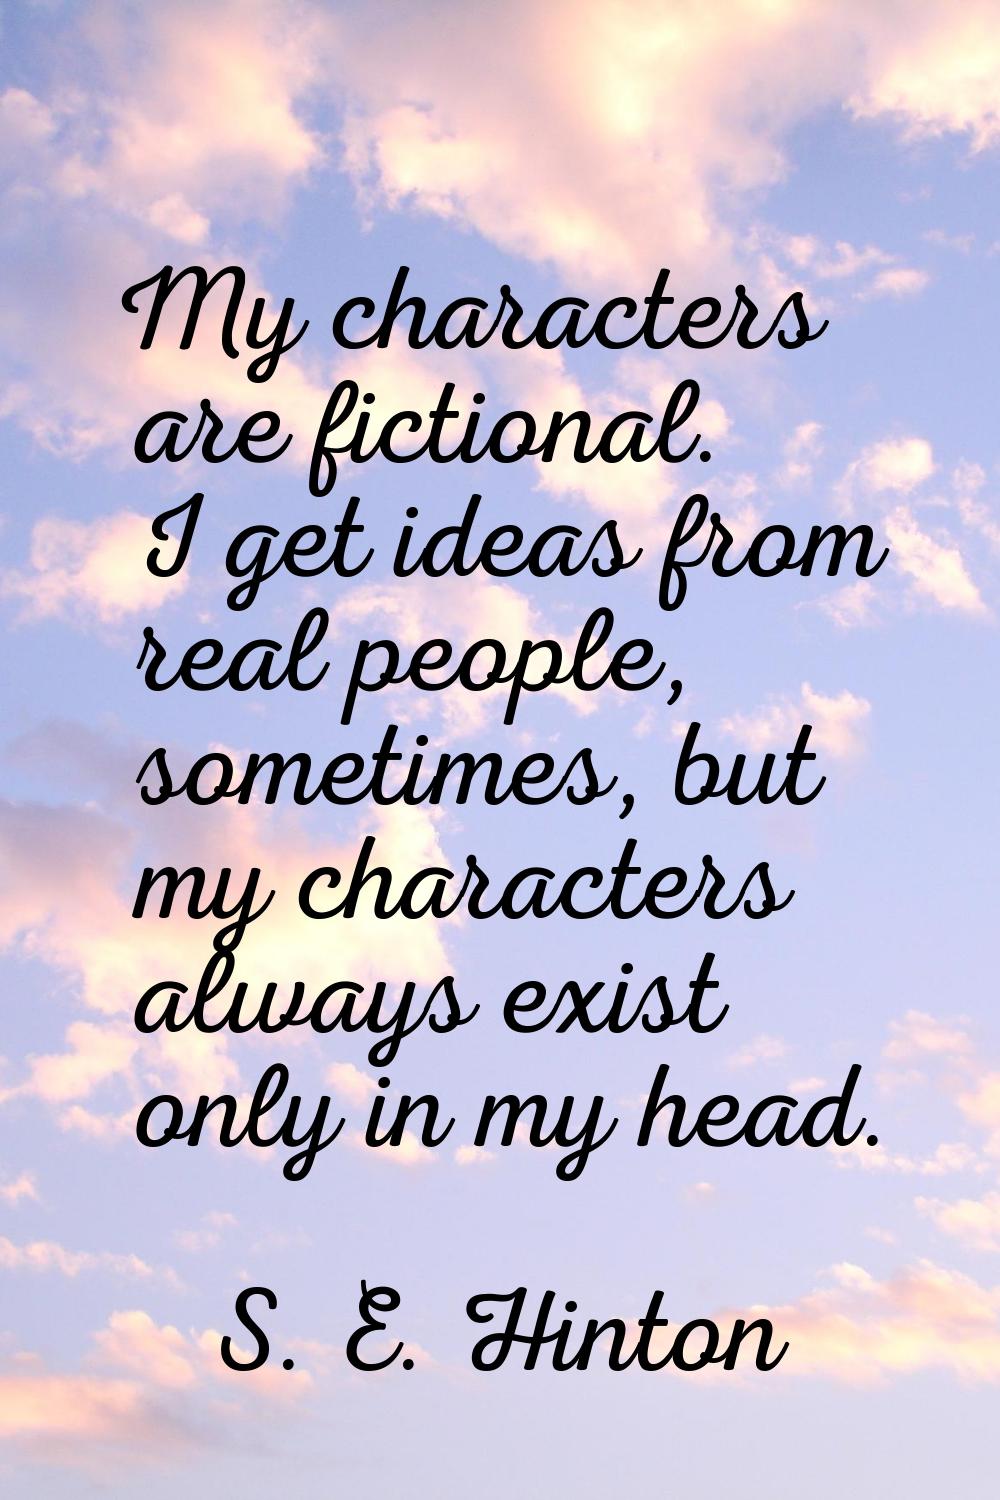 My characters are fictional. I get ideas from real people, sometimes, but my characters always exis